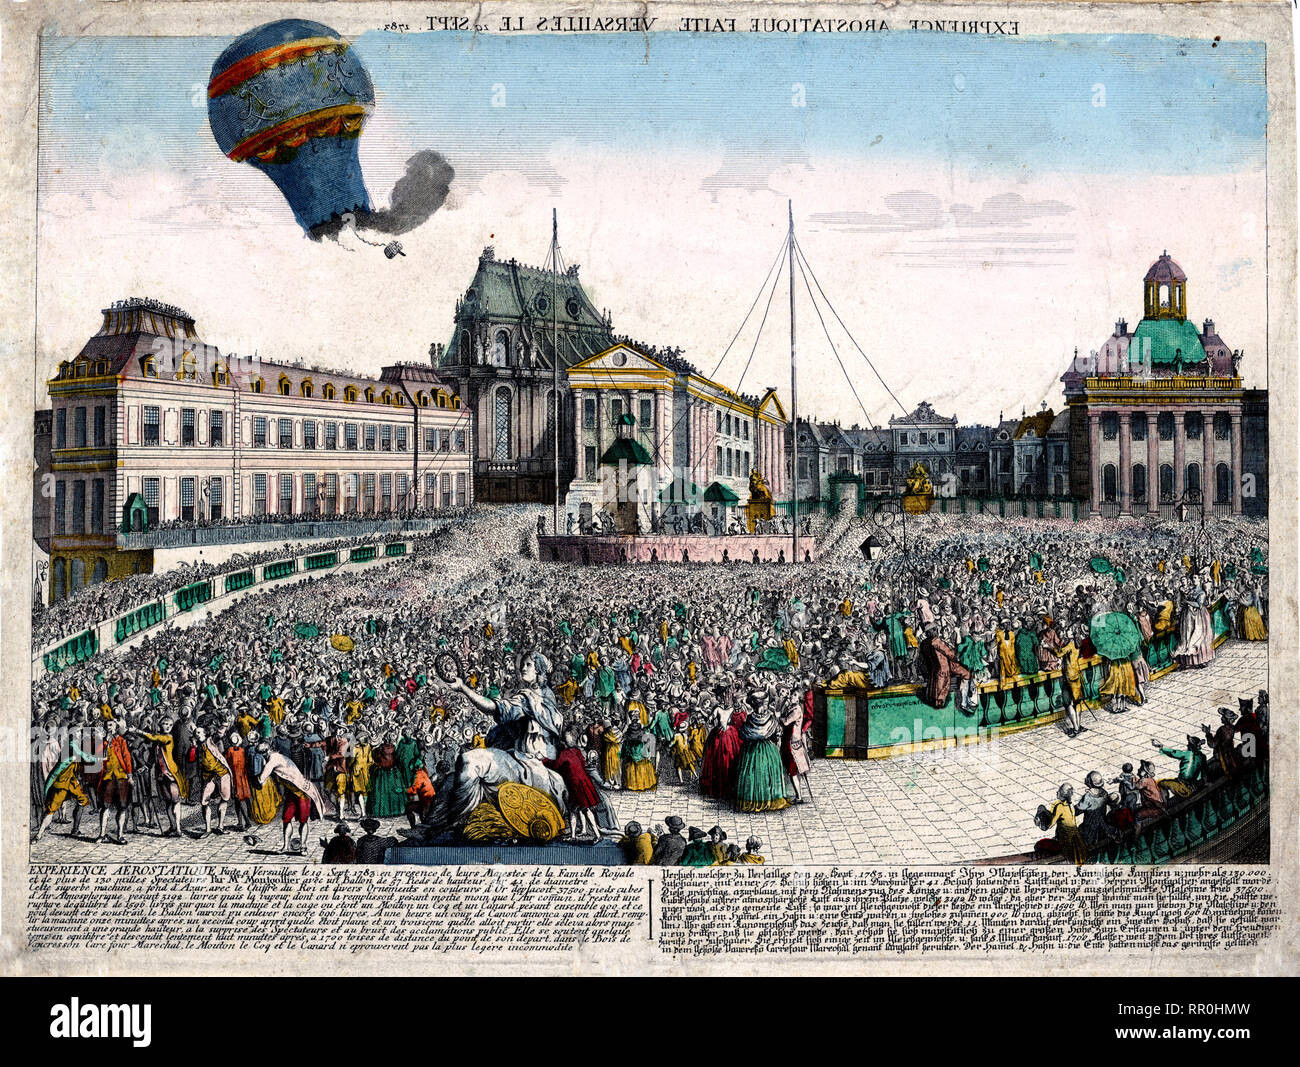 Vue d'optique shows the balloon launched by the Montgolfier brothers ascending from the Palace of Versailles, France, before the royal family, September 19, 1783. Stock Photo